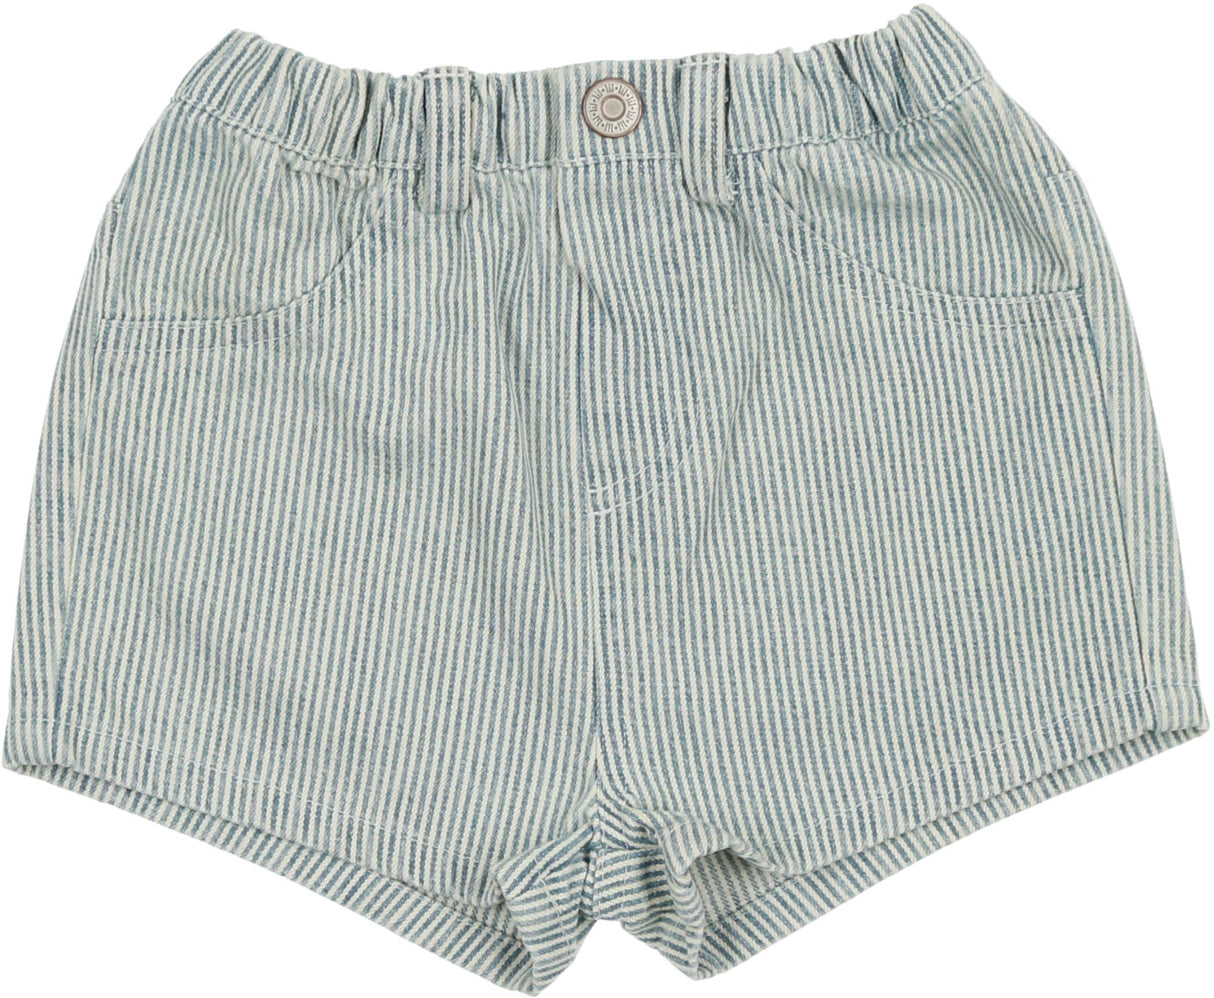 Analogie by Lil Legs Printed Denim Collection Boys Girls Stripe Shorts